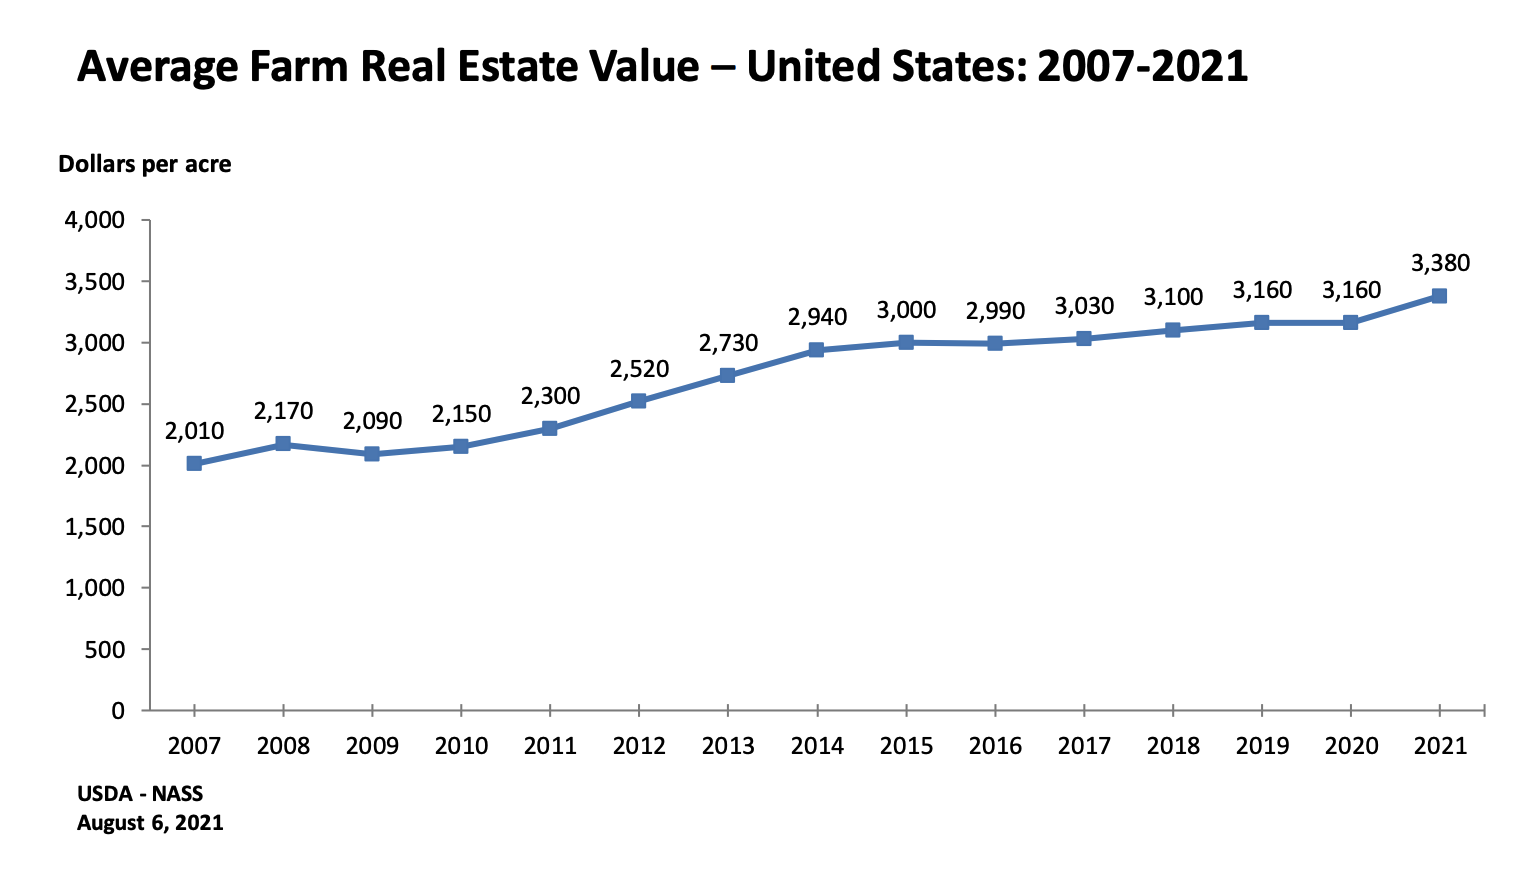 Chart displaying average farm real estate value over 20 years